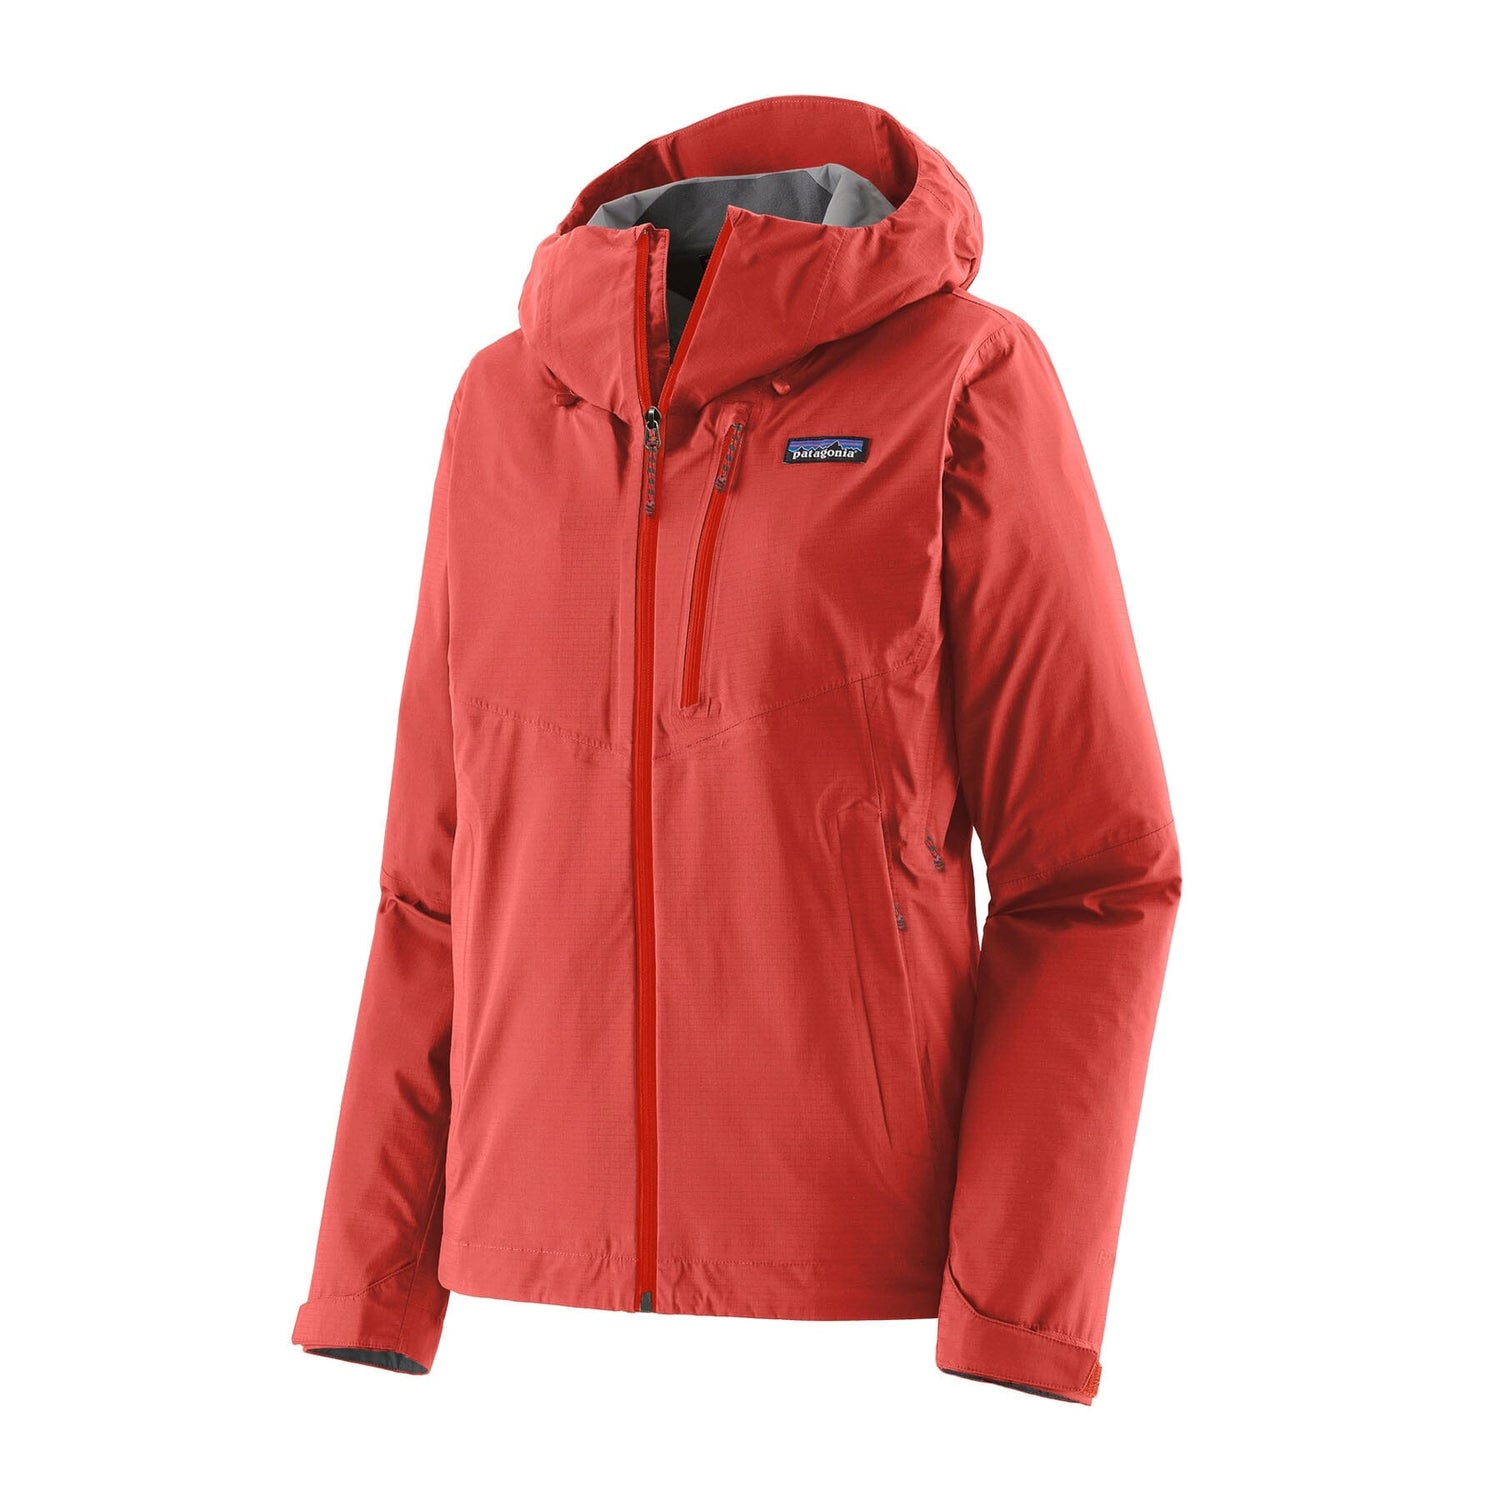 Patagonia W's Granite Crest Shell Jacket - 100% Recycled Nylon Pimento Red S Jacket